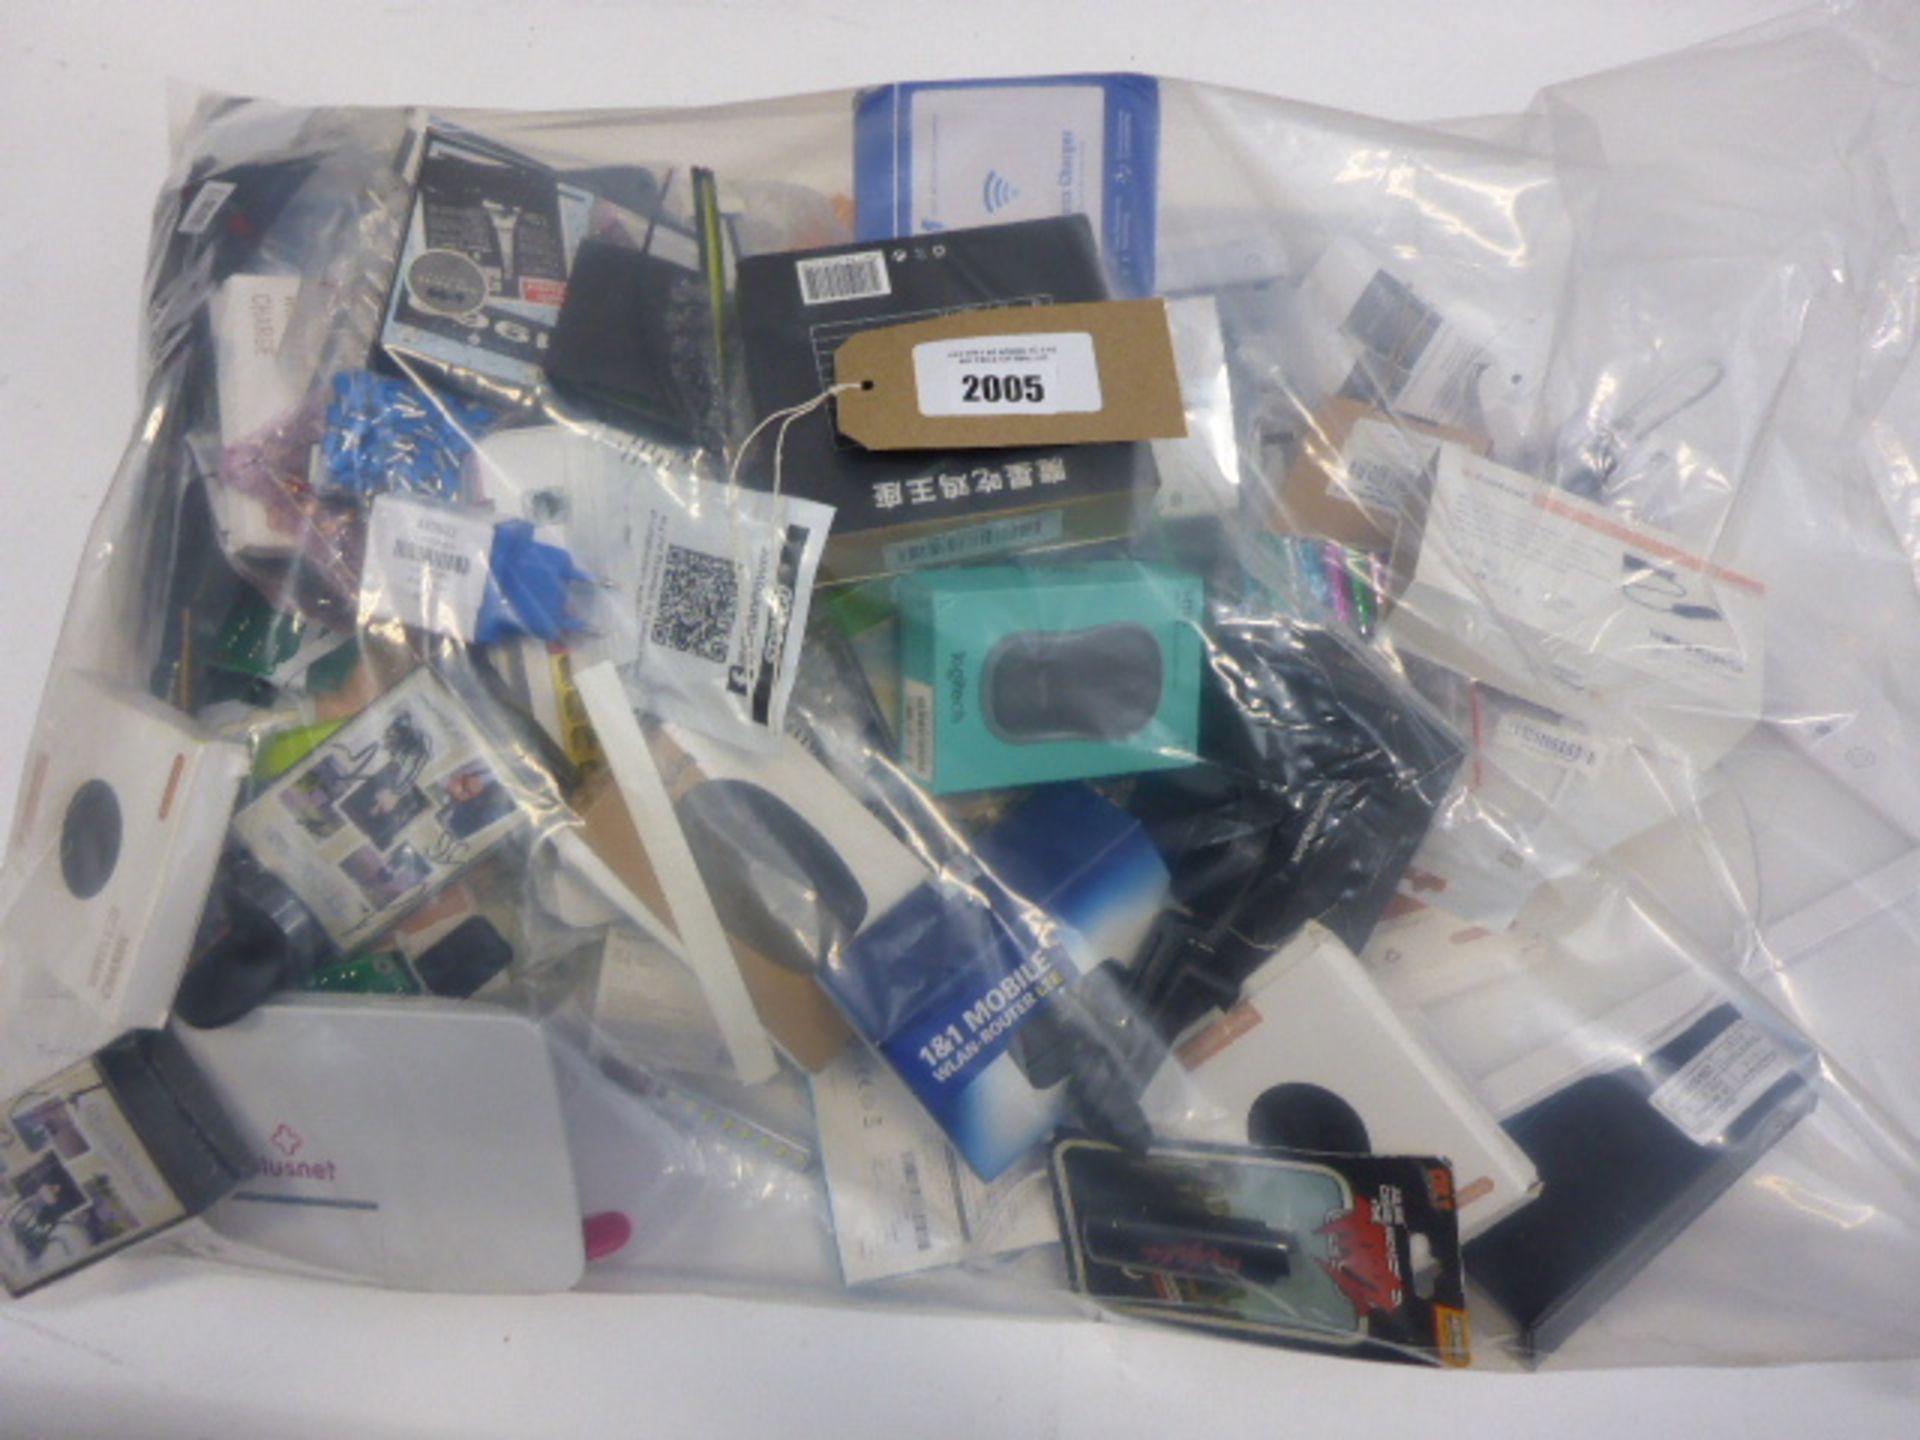 Bag containing quantity of various electrical related items and devices